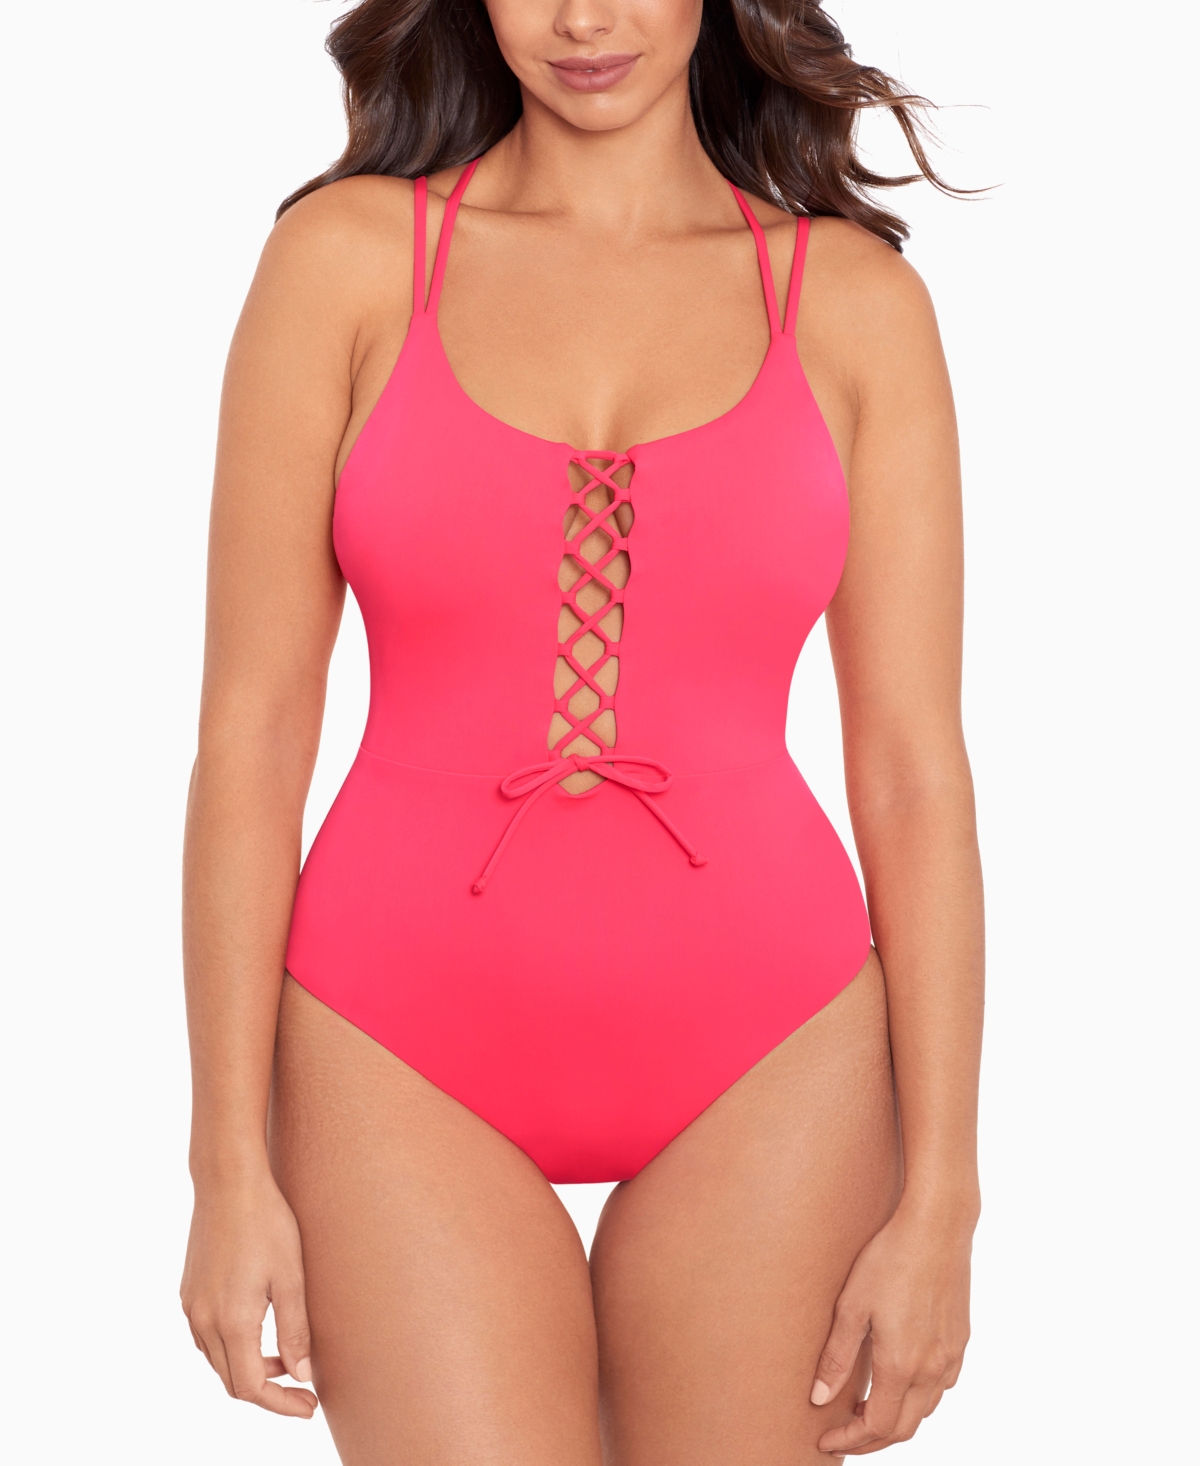 SKINNY DIPPERS JELLY BEANS SUGA BABE LACE UP FRONT TUMMY CONTROL ONE-PIECE SWIMSUIT